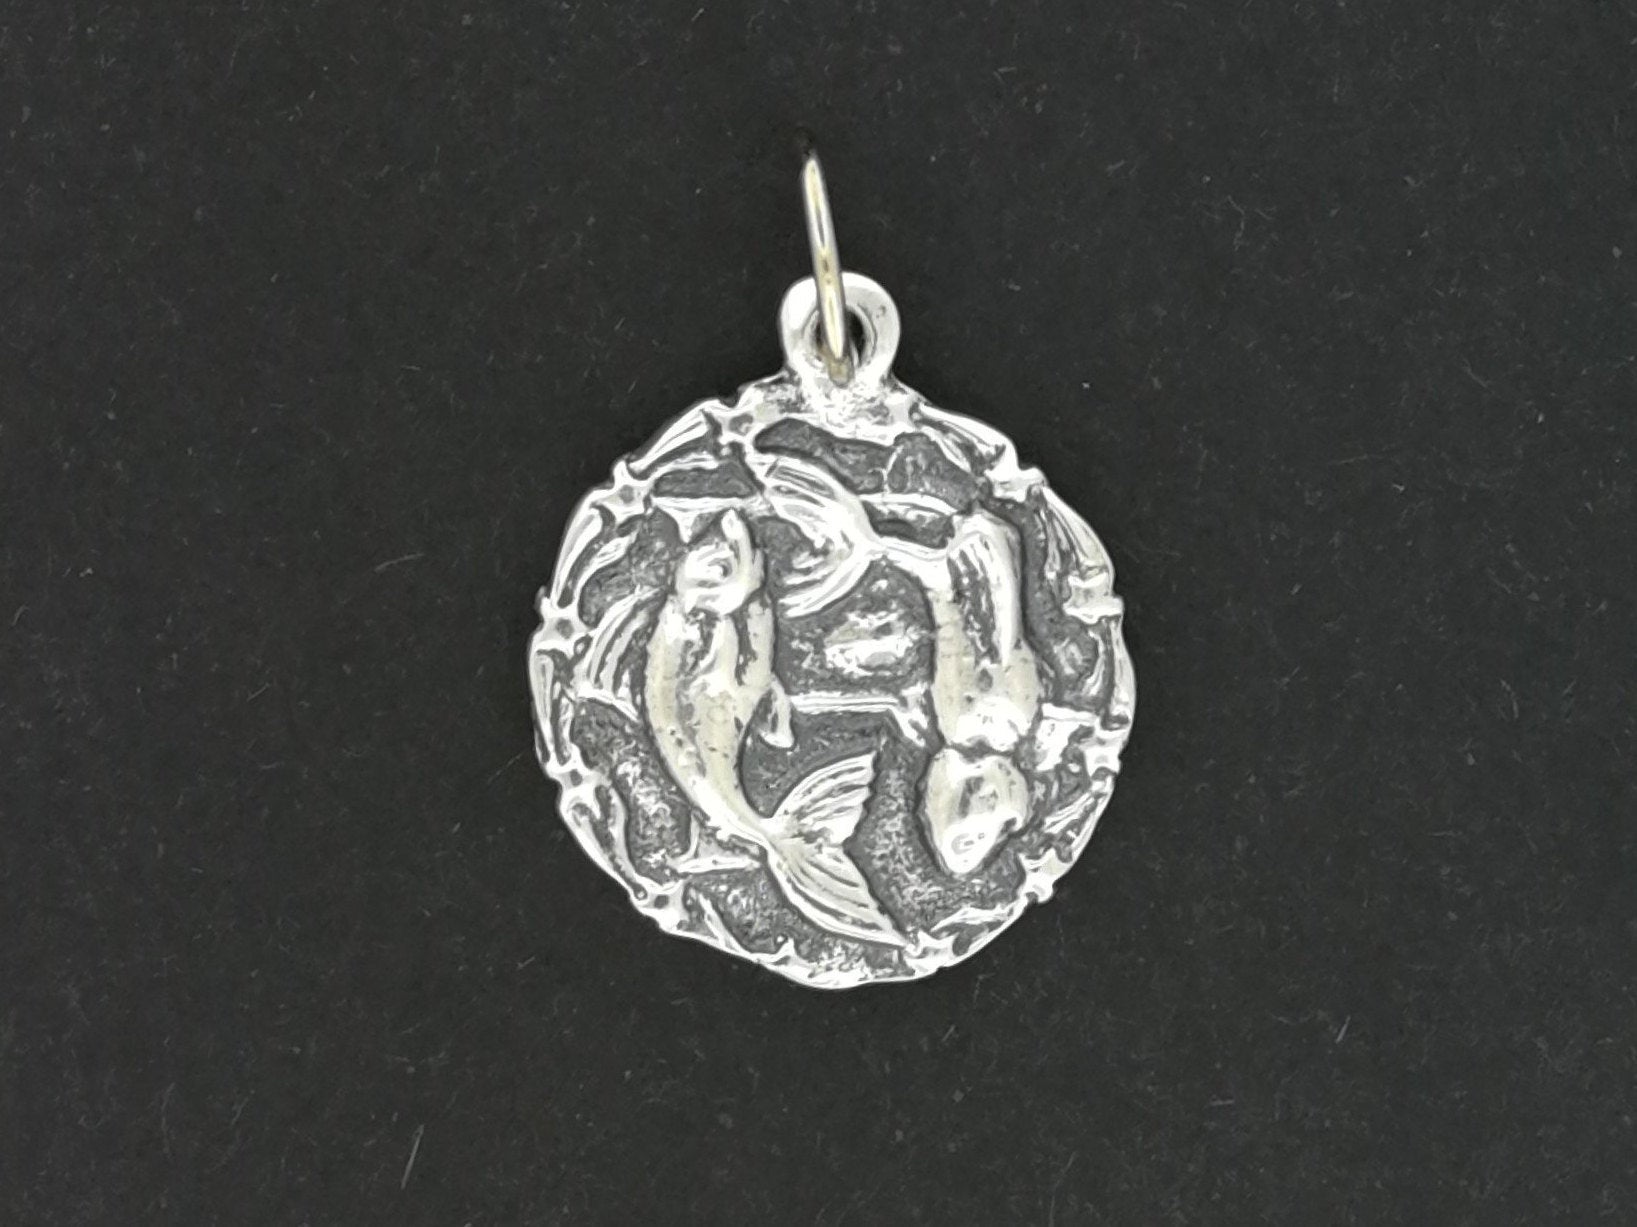 Zodiac Medallion Pisces in Sterling Silver or Antique Bronze, Pisces Medallion Pendant, Pisces Birthday Gift, Pisces Zodiac Medallion, Silver Pisces Medallion, Silver Pisces Pendant, Bronze Pisces Pendant, Bronze Pisces Medallion, Bronze Zodiac Pendant, Bronze Zodiac Medallion, Pisces Birthday Gift, Silver Pisces Jewelry, Silver Pisces Jewellery, Bronze Pisces Jewelry, Bronze Pisces Jewellery